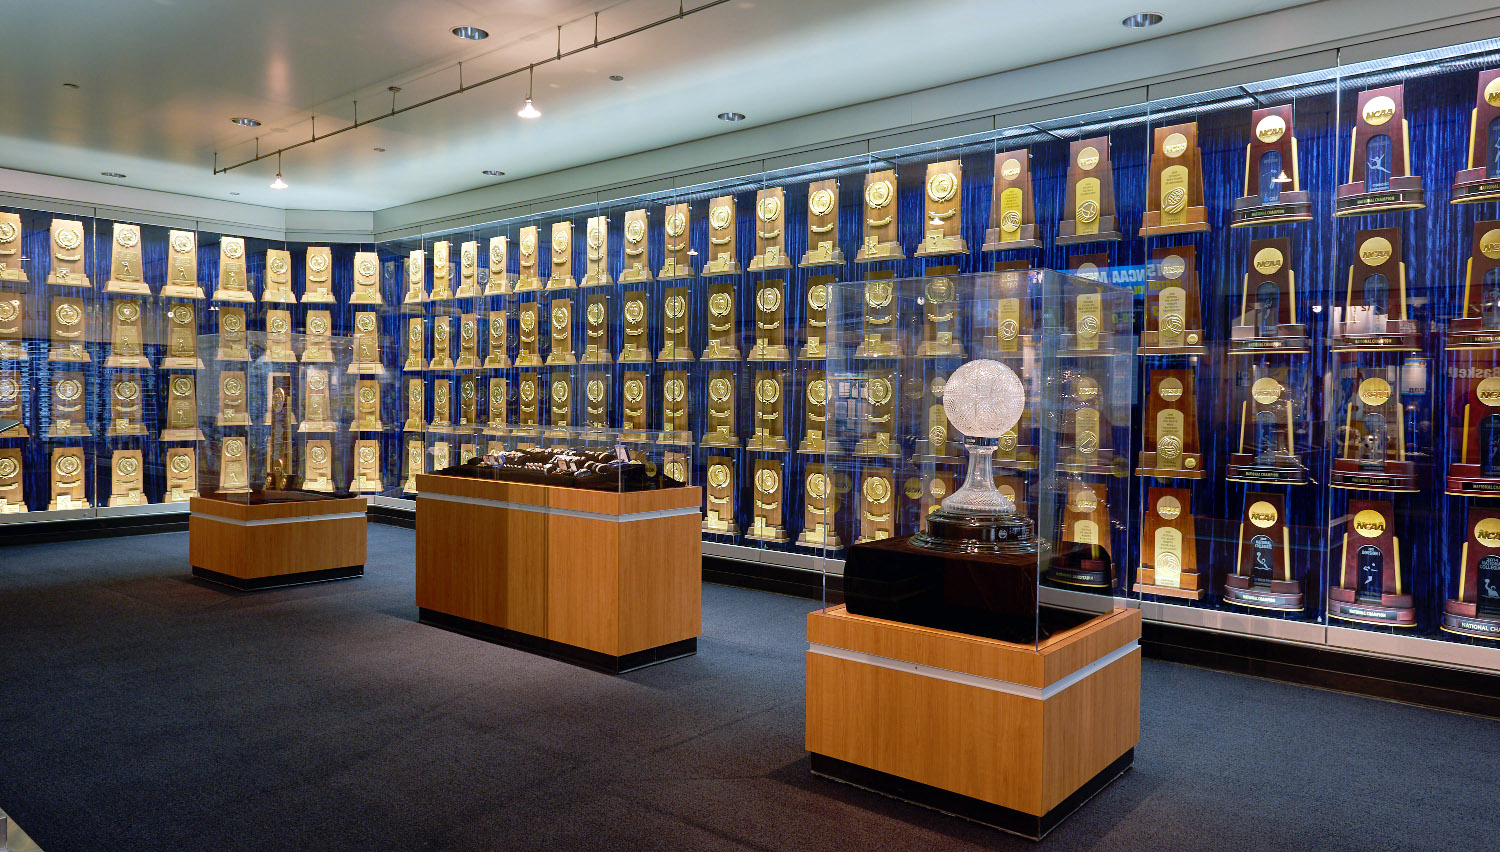 UCLA Hall of Fame awards and trophies